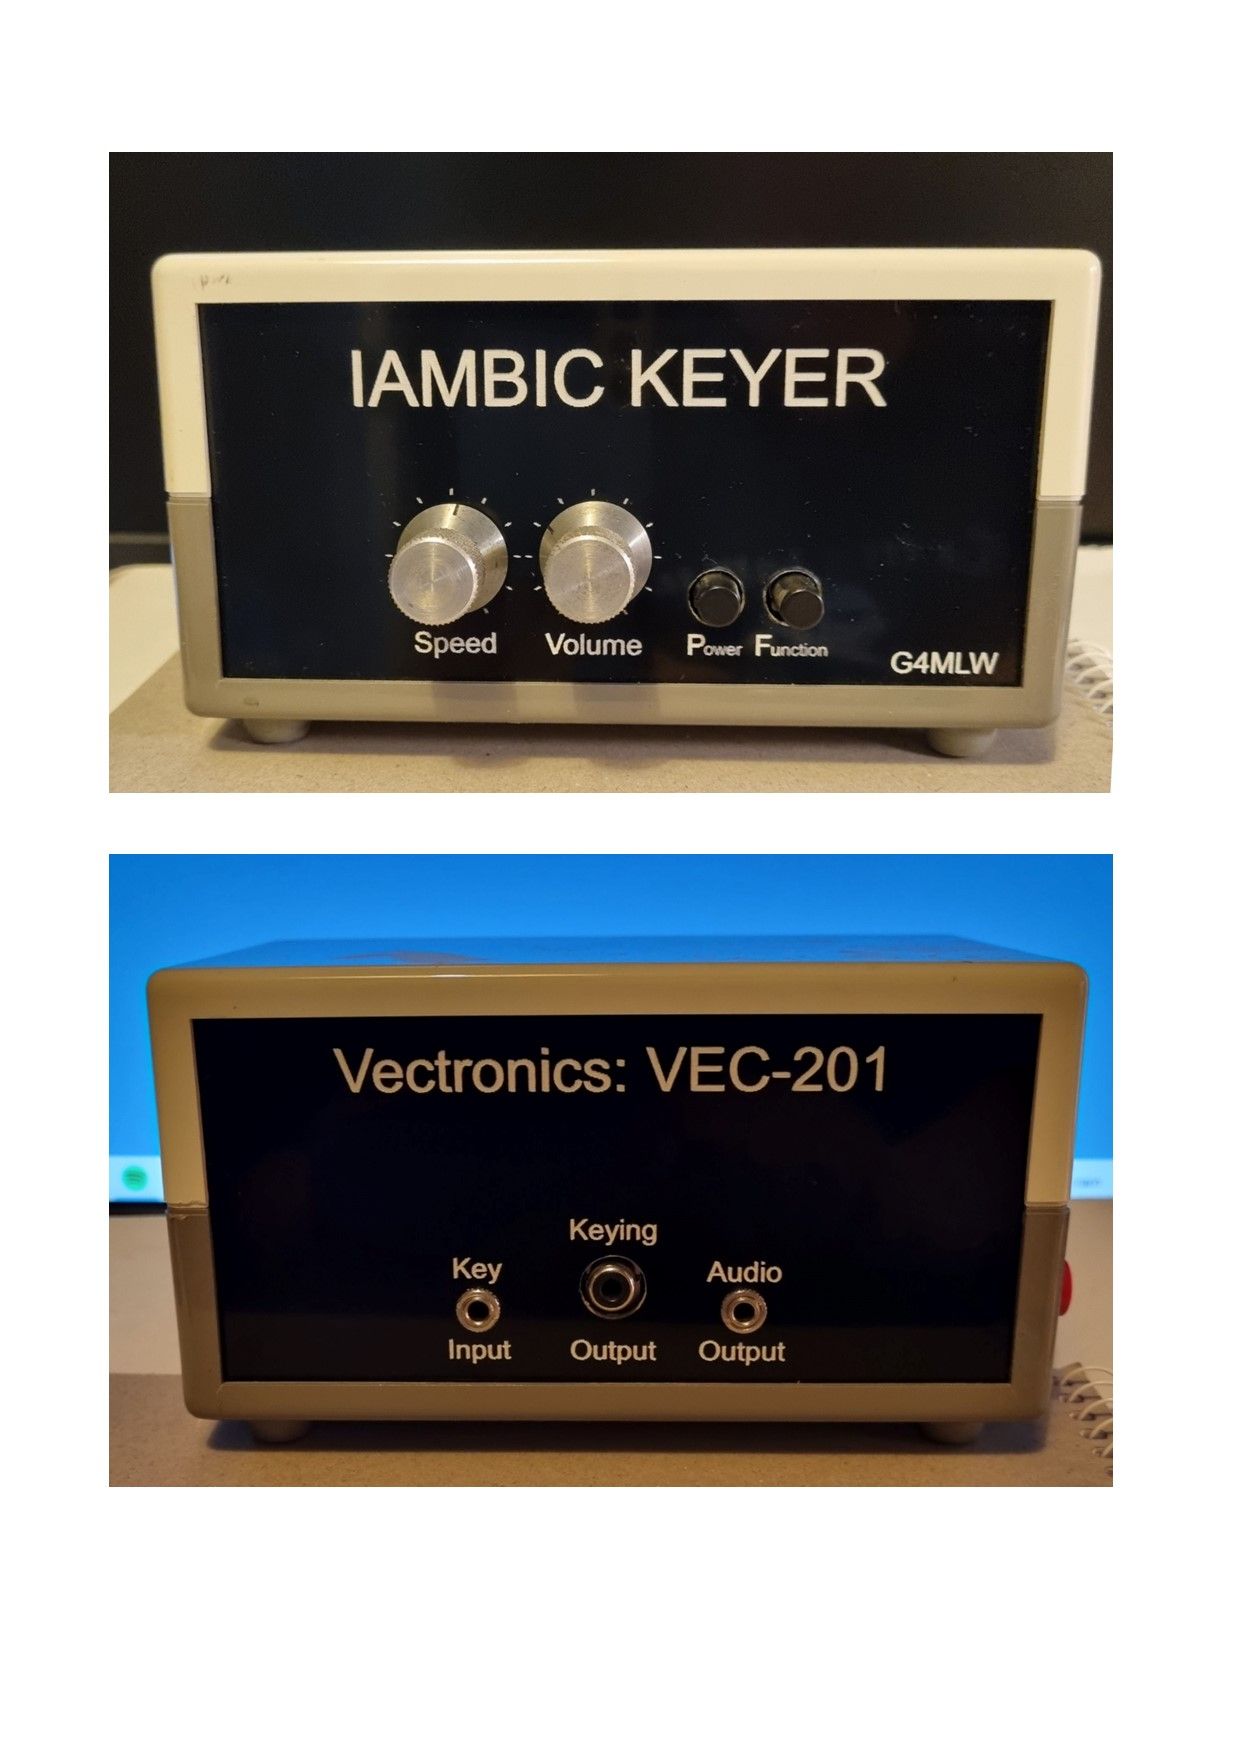 iambic keyer new front and back